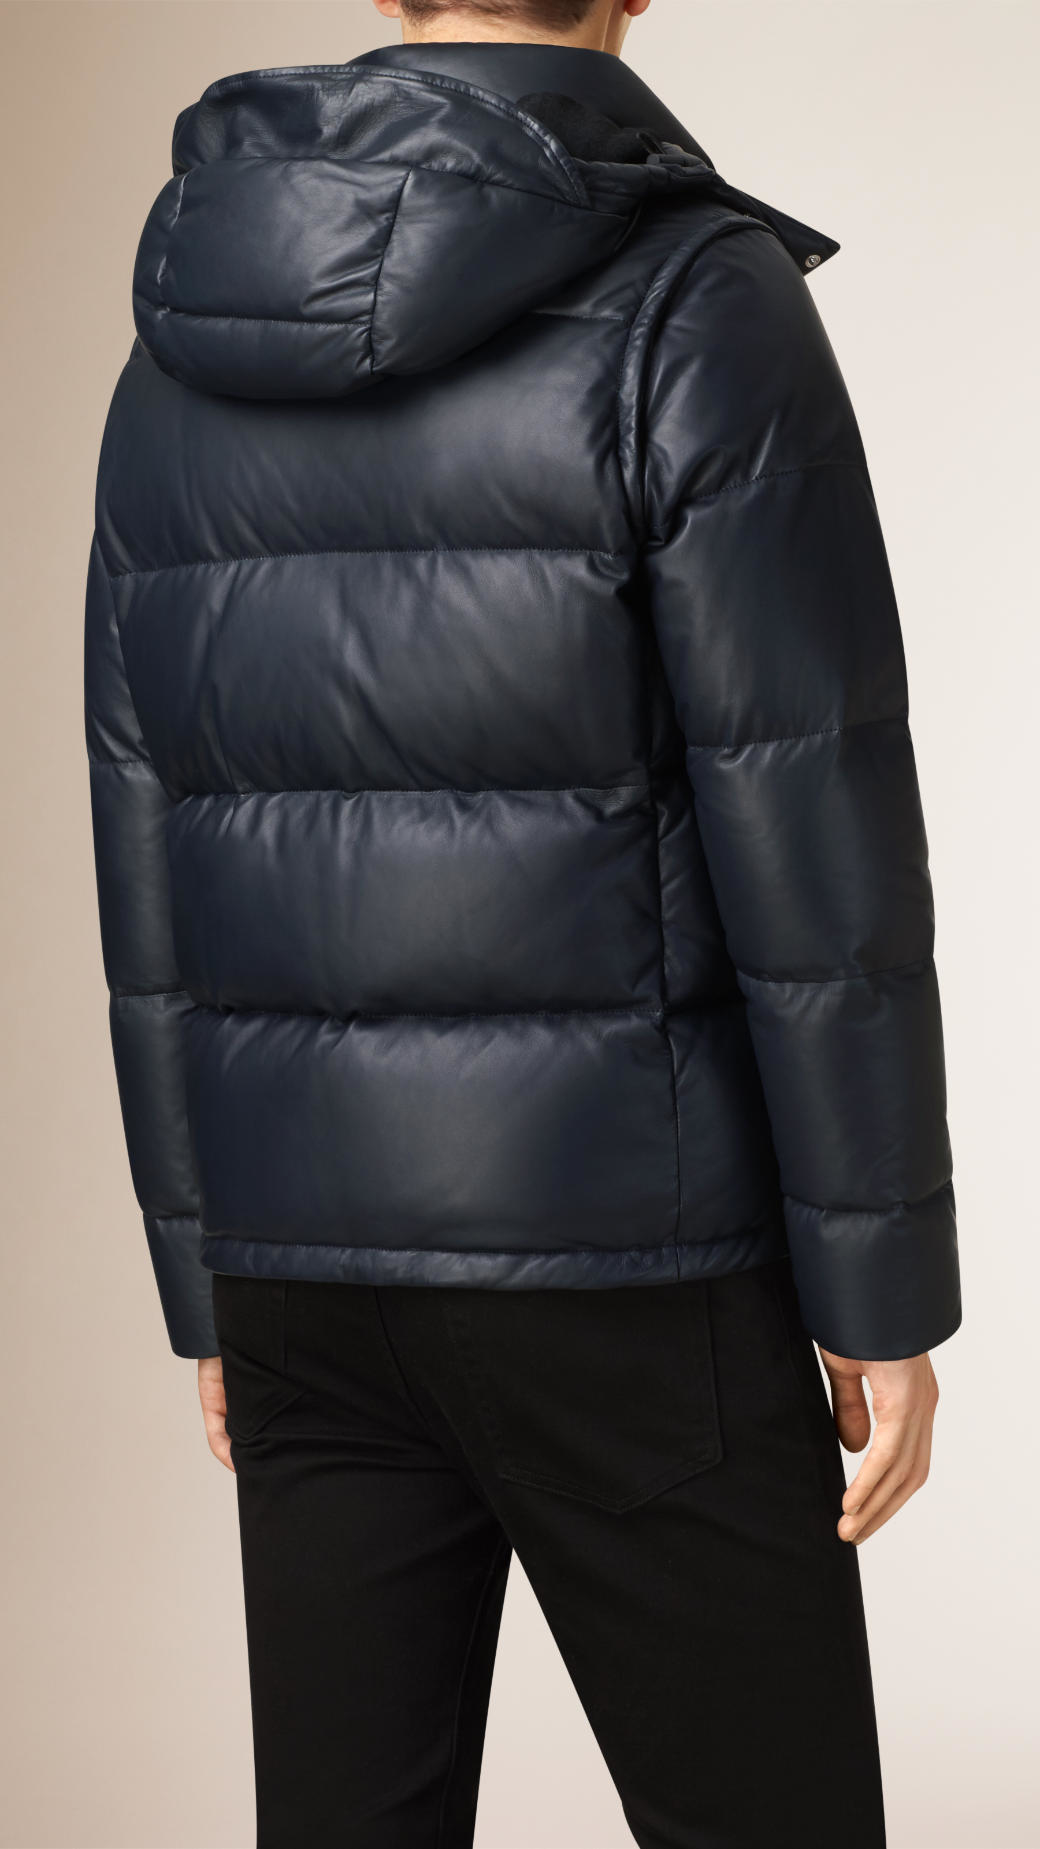 Burberry Leather Lambskin Puffer Jacket With Removable Sleeves in Navy ...